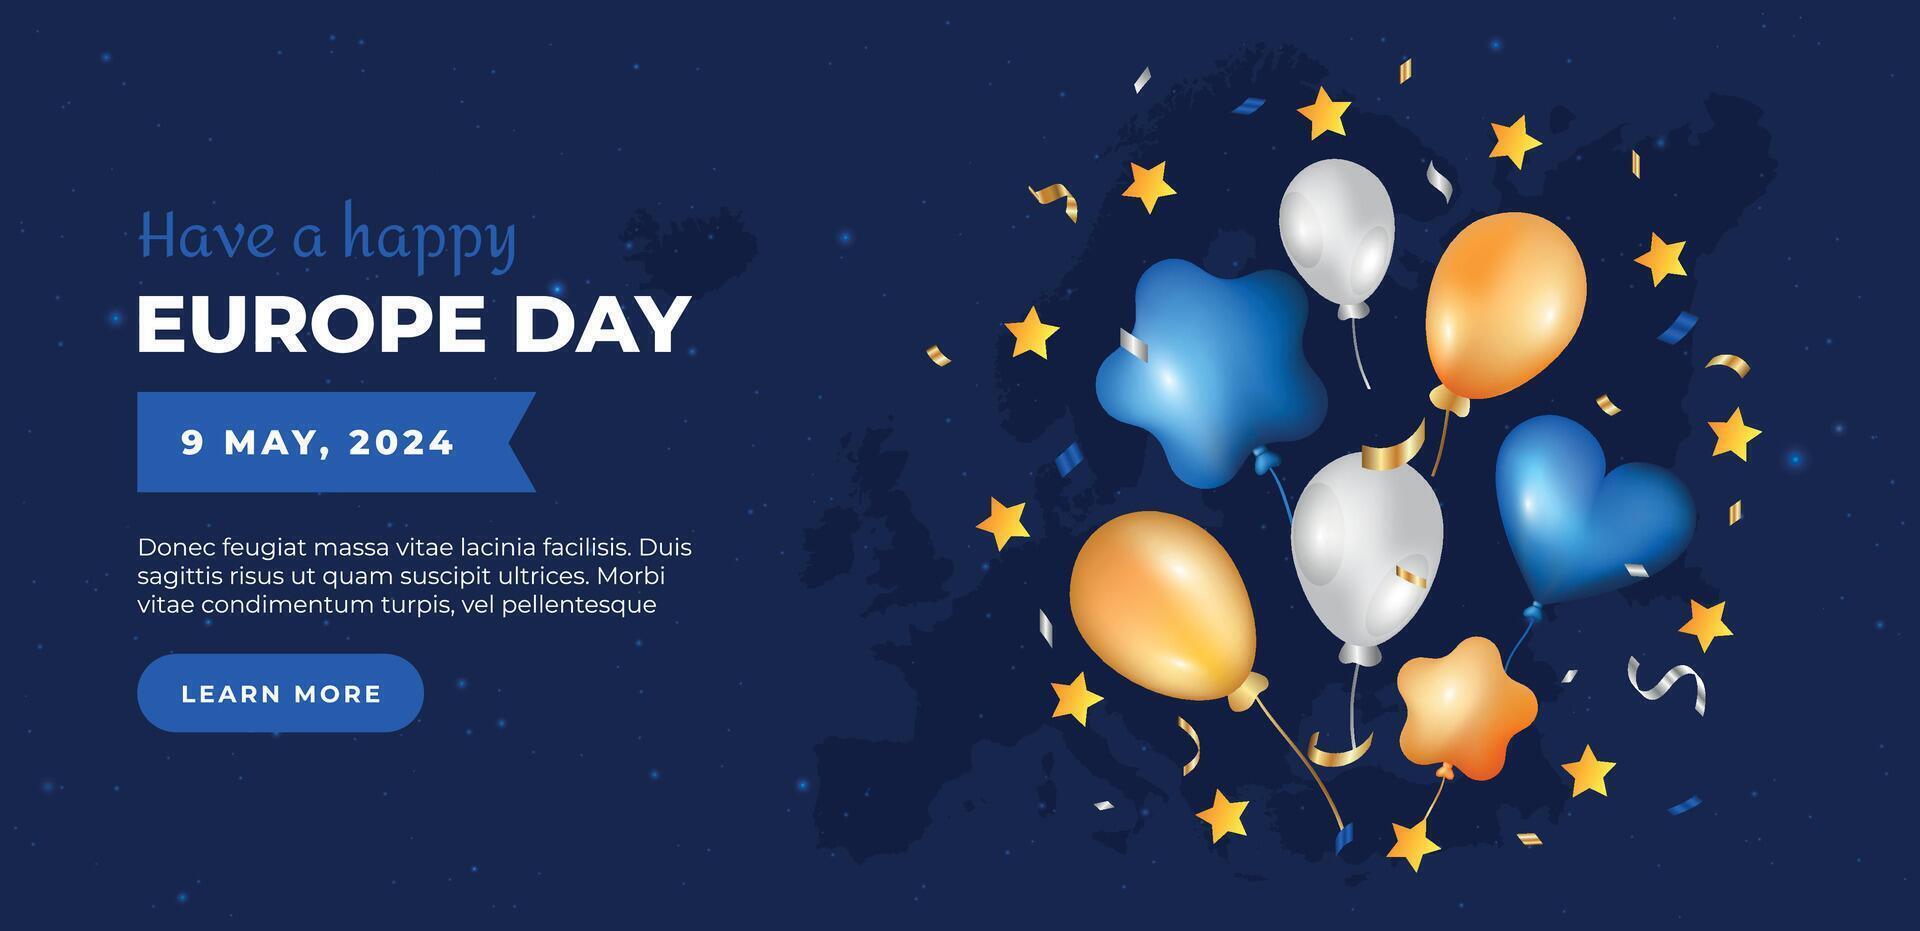 Europe Day 9th May. Happy Europe day blue banner with map and balloons vector